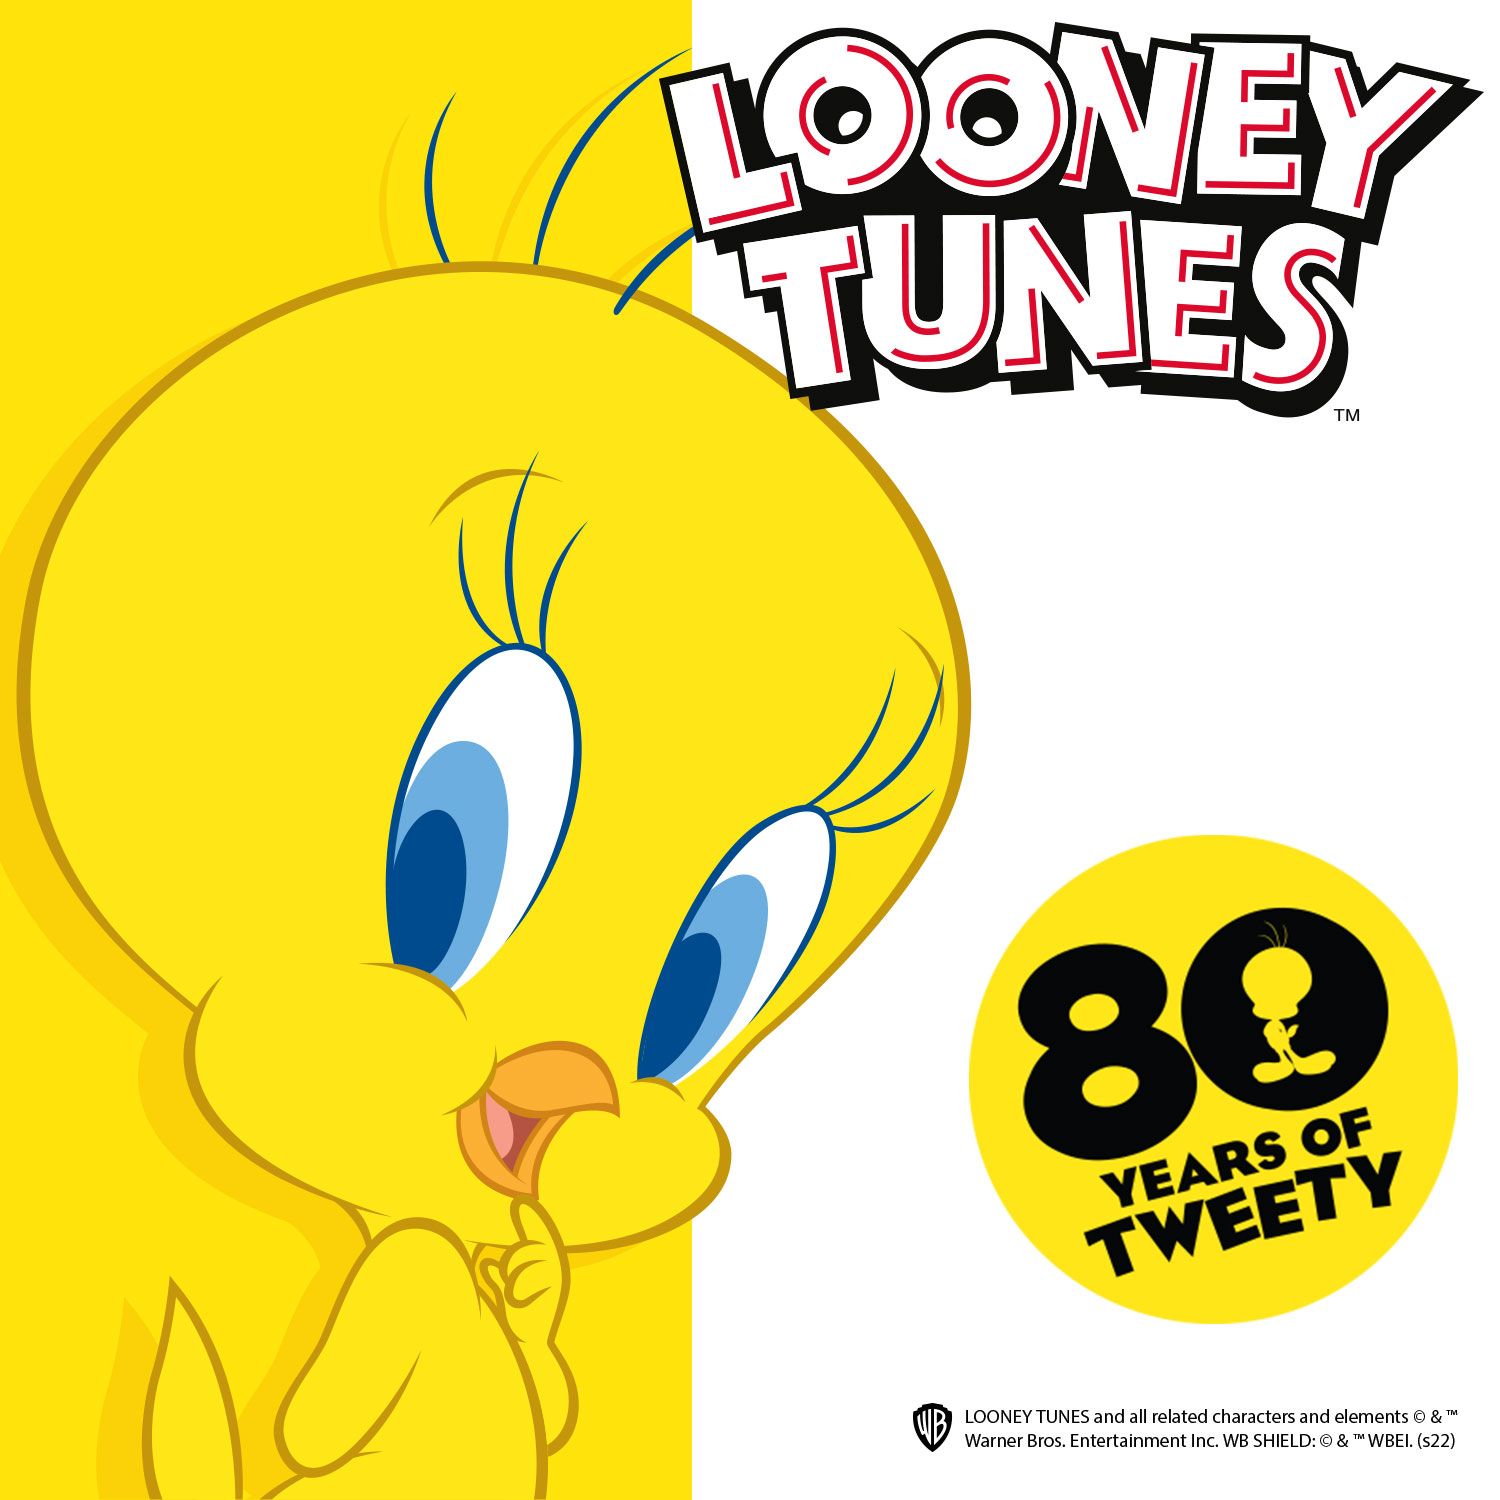 LOONEY TUNES AND All RELATED CHARACTERS AND ELEMENTS © & ™WARNER BROS. ENTERTAINMENT INC. (S22)